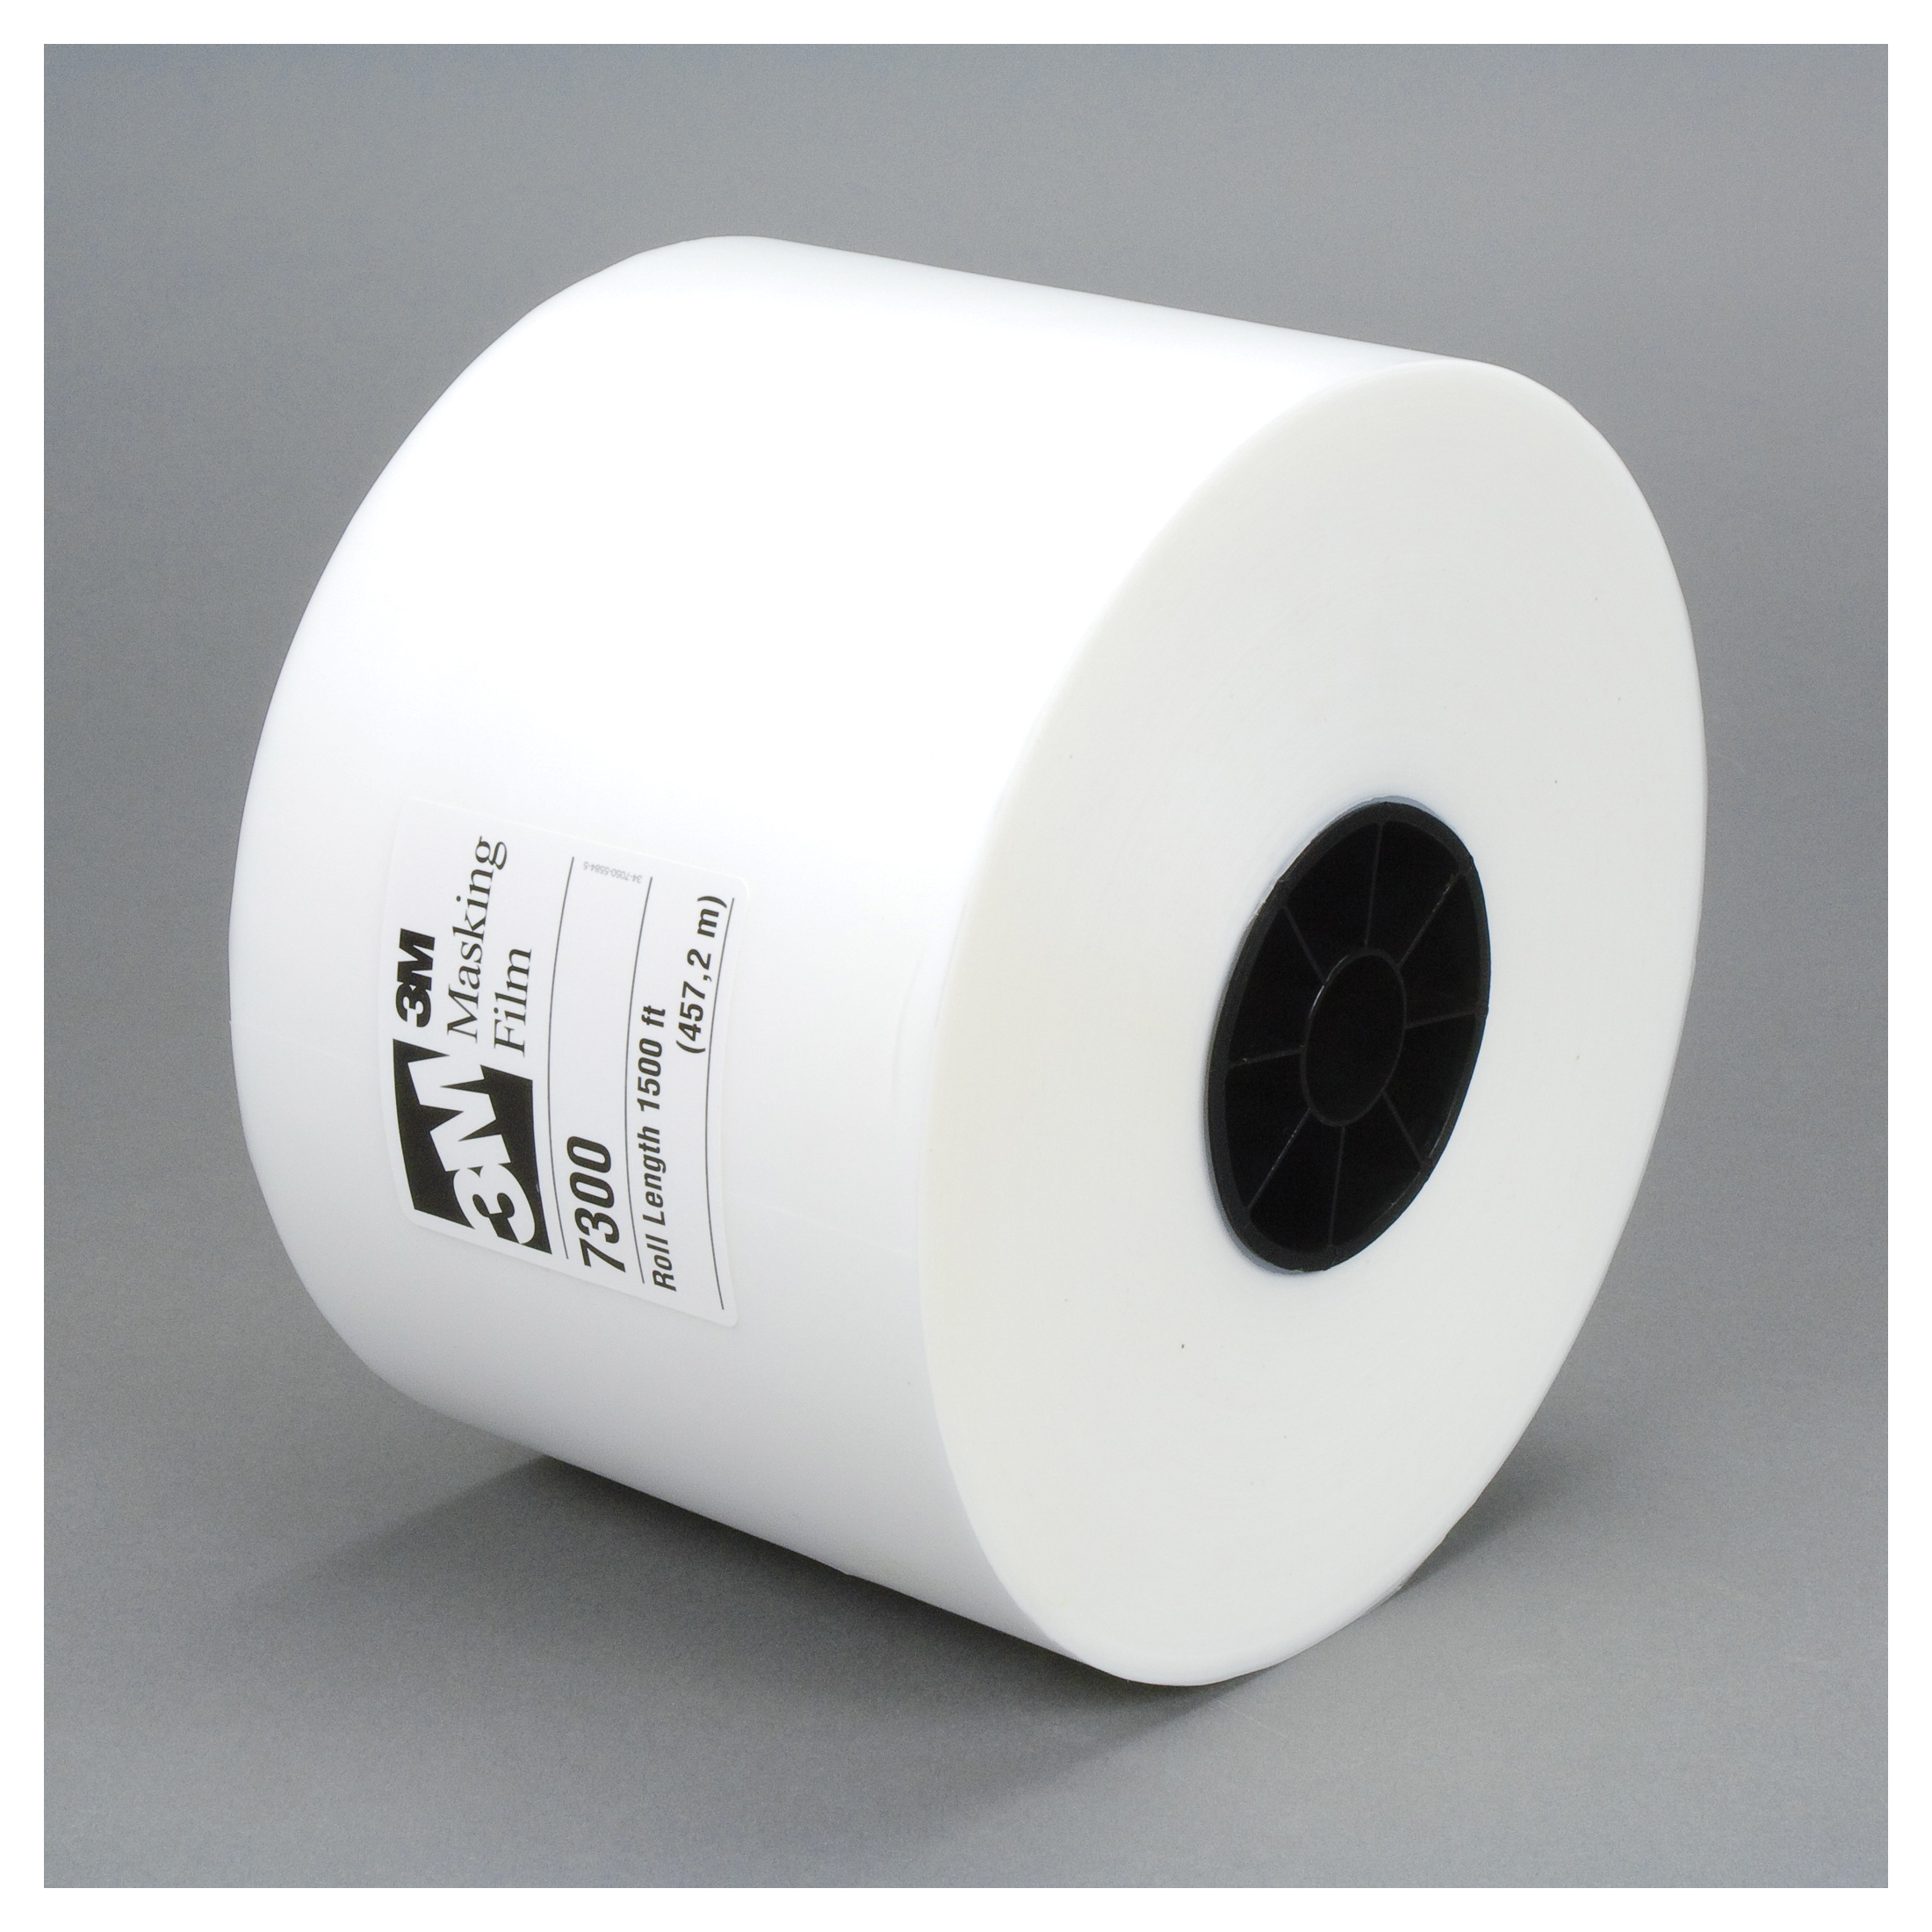 Scotch® 021200-06301 Fine Line Tape, 60 yd L x 1/4 in W, 5 mil THK, Rubber Adhesive, Polypropylene Backing